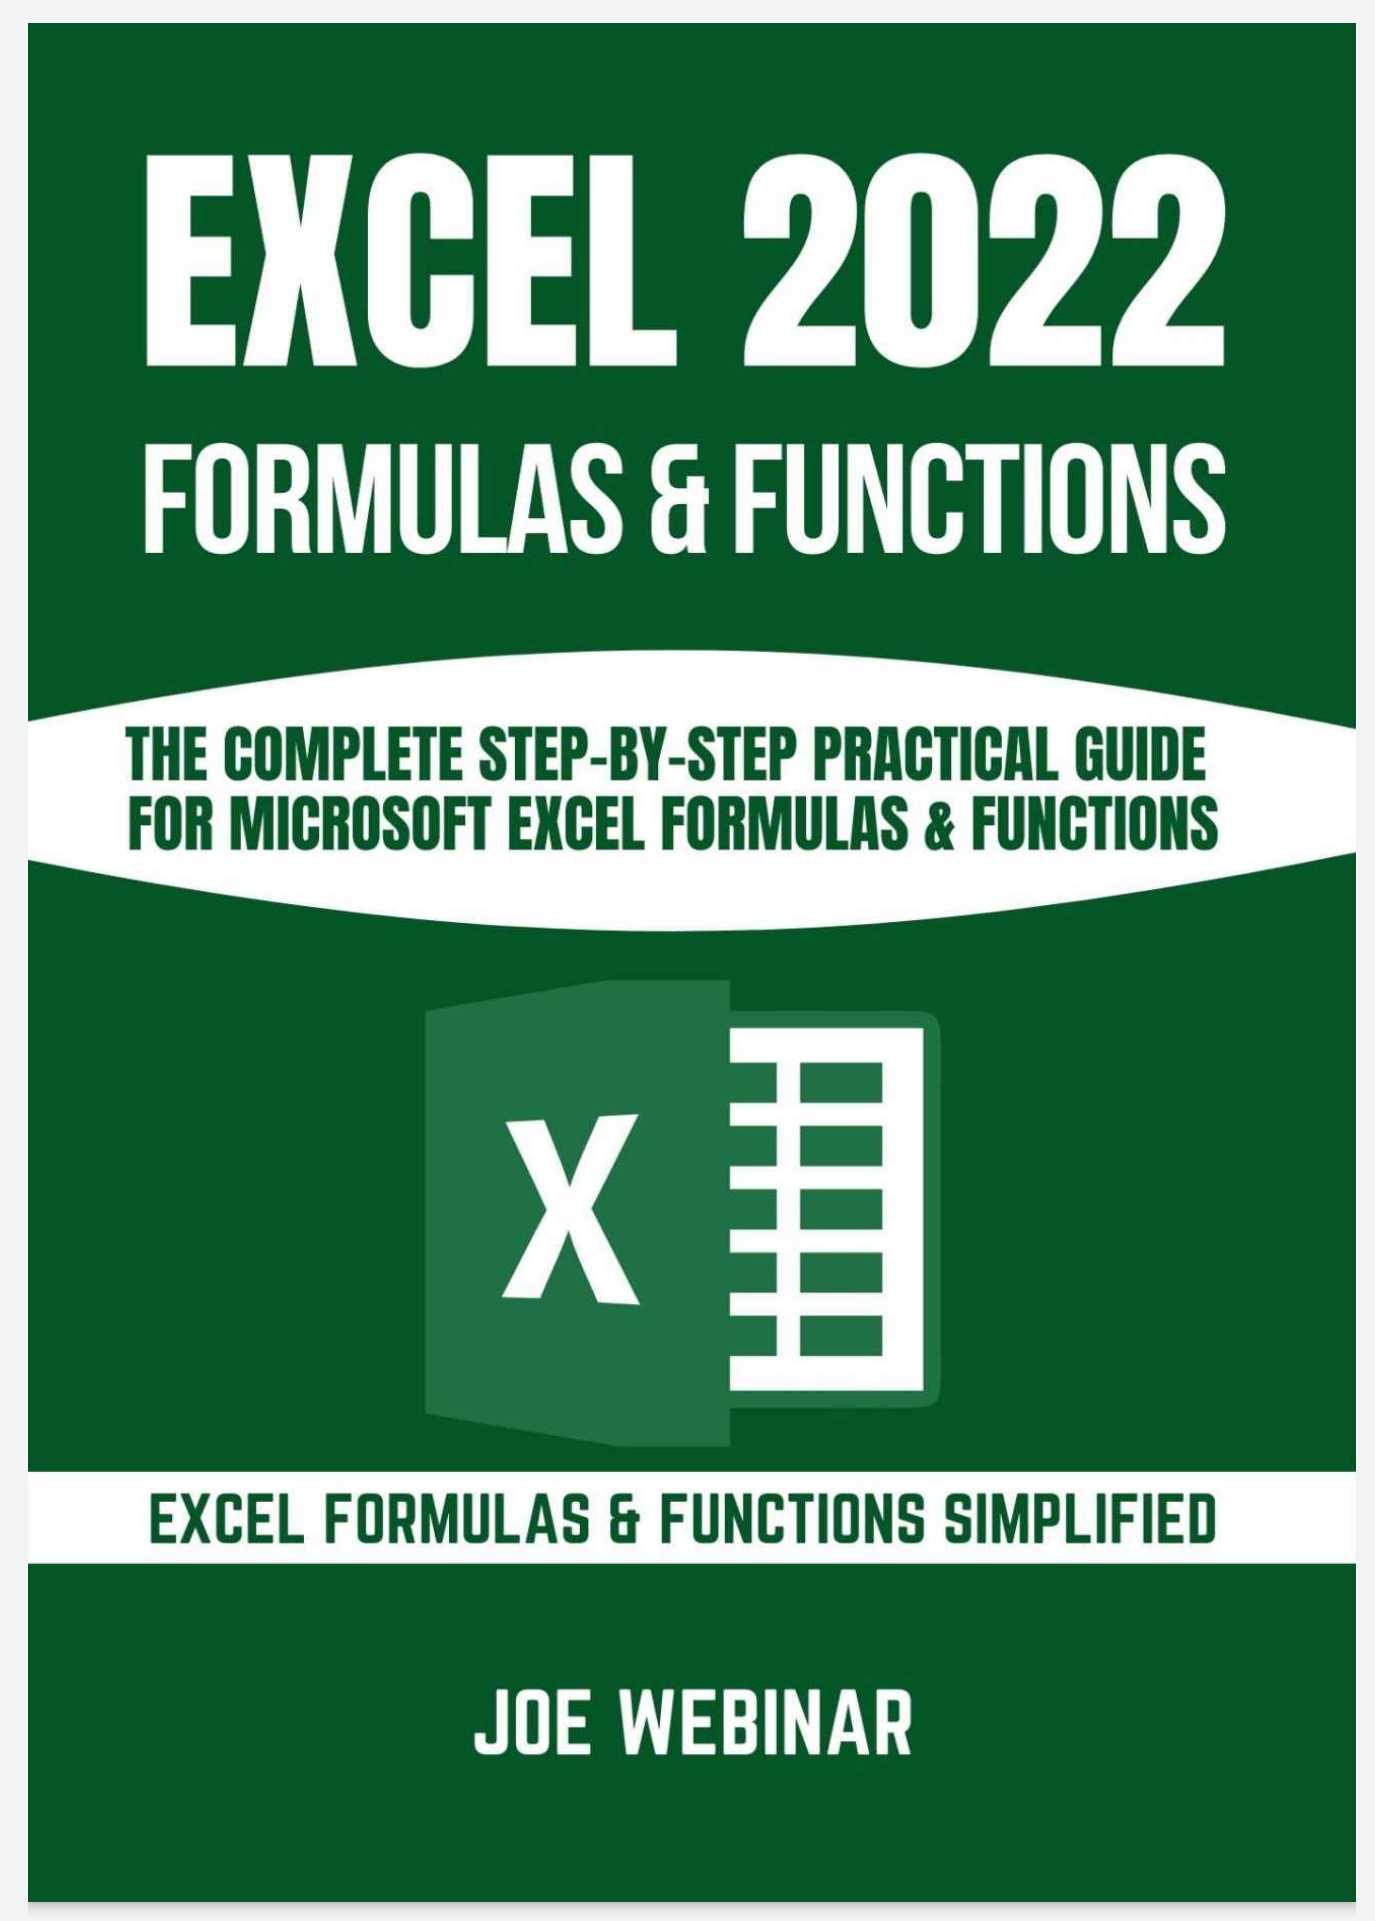 Excel 2022 Formulas & Functions: The Complete Step-By-Step Practical Guide For Microsoft Excel Formulas & Functions